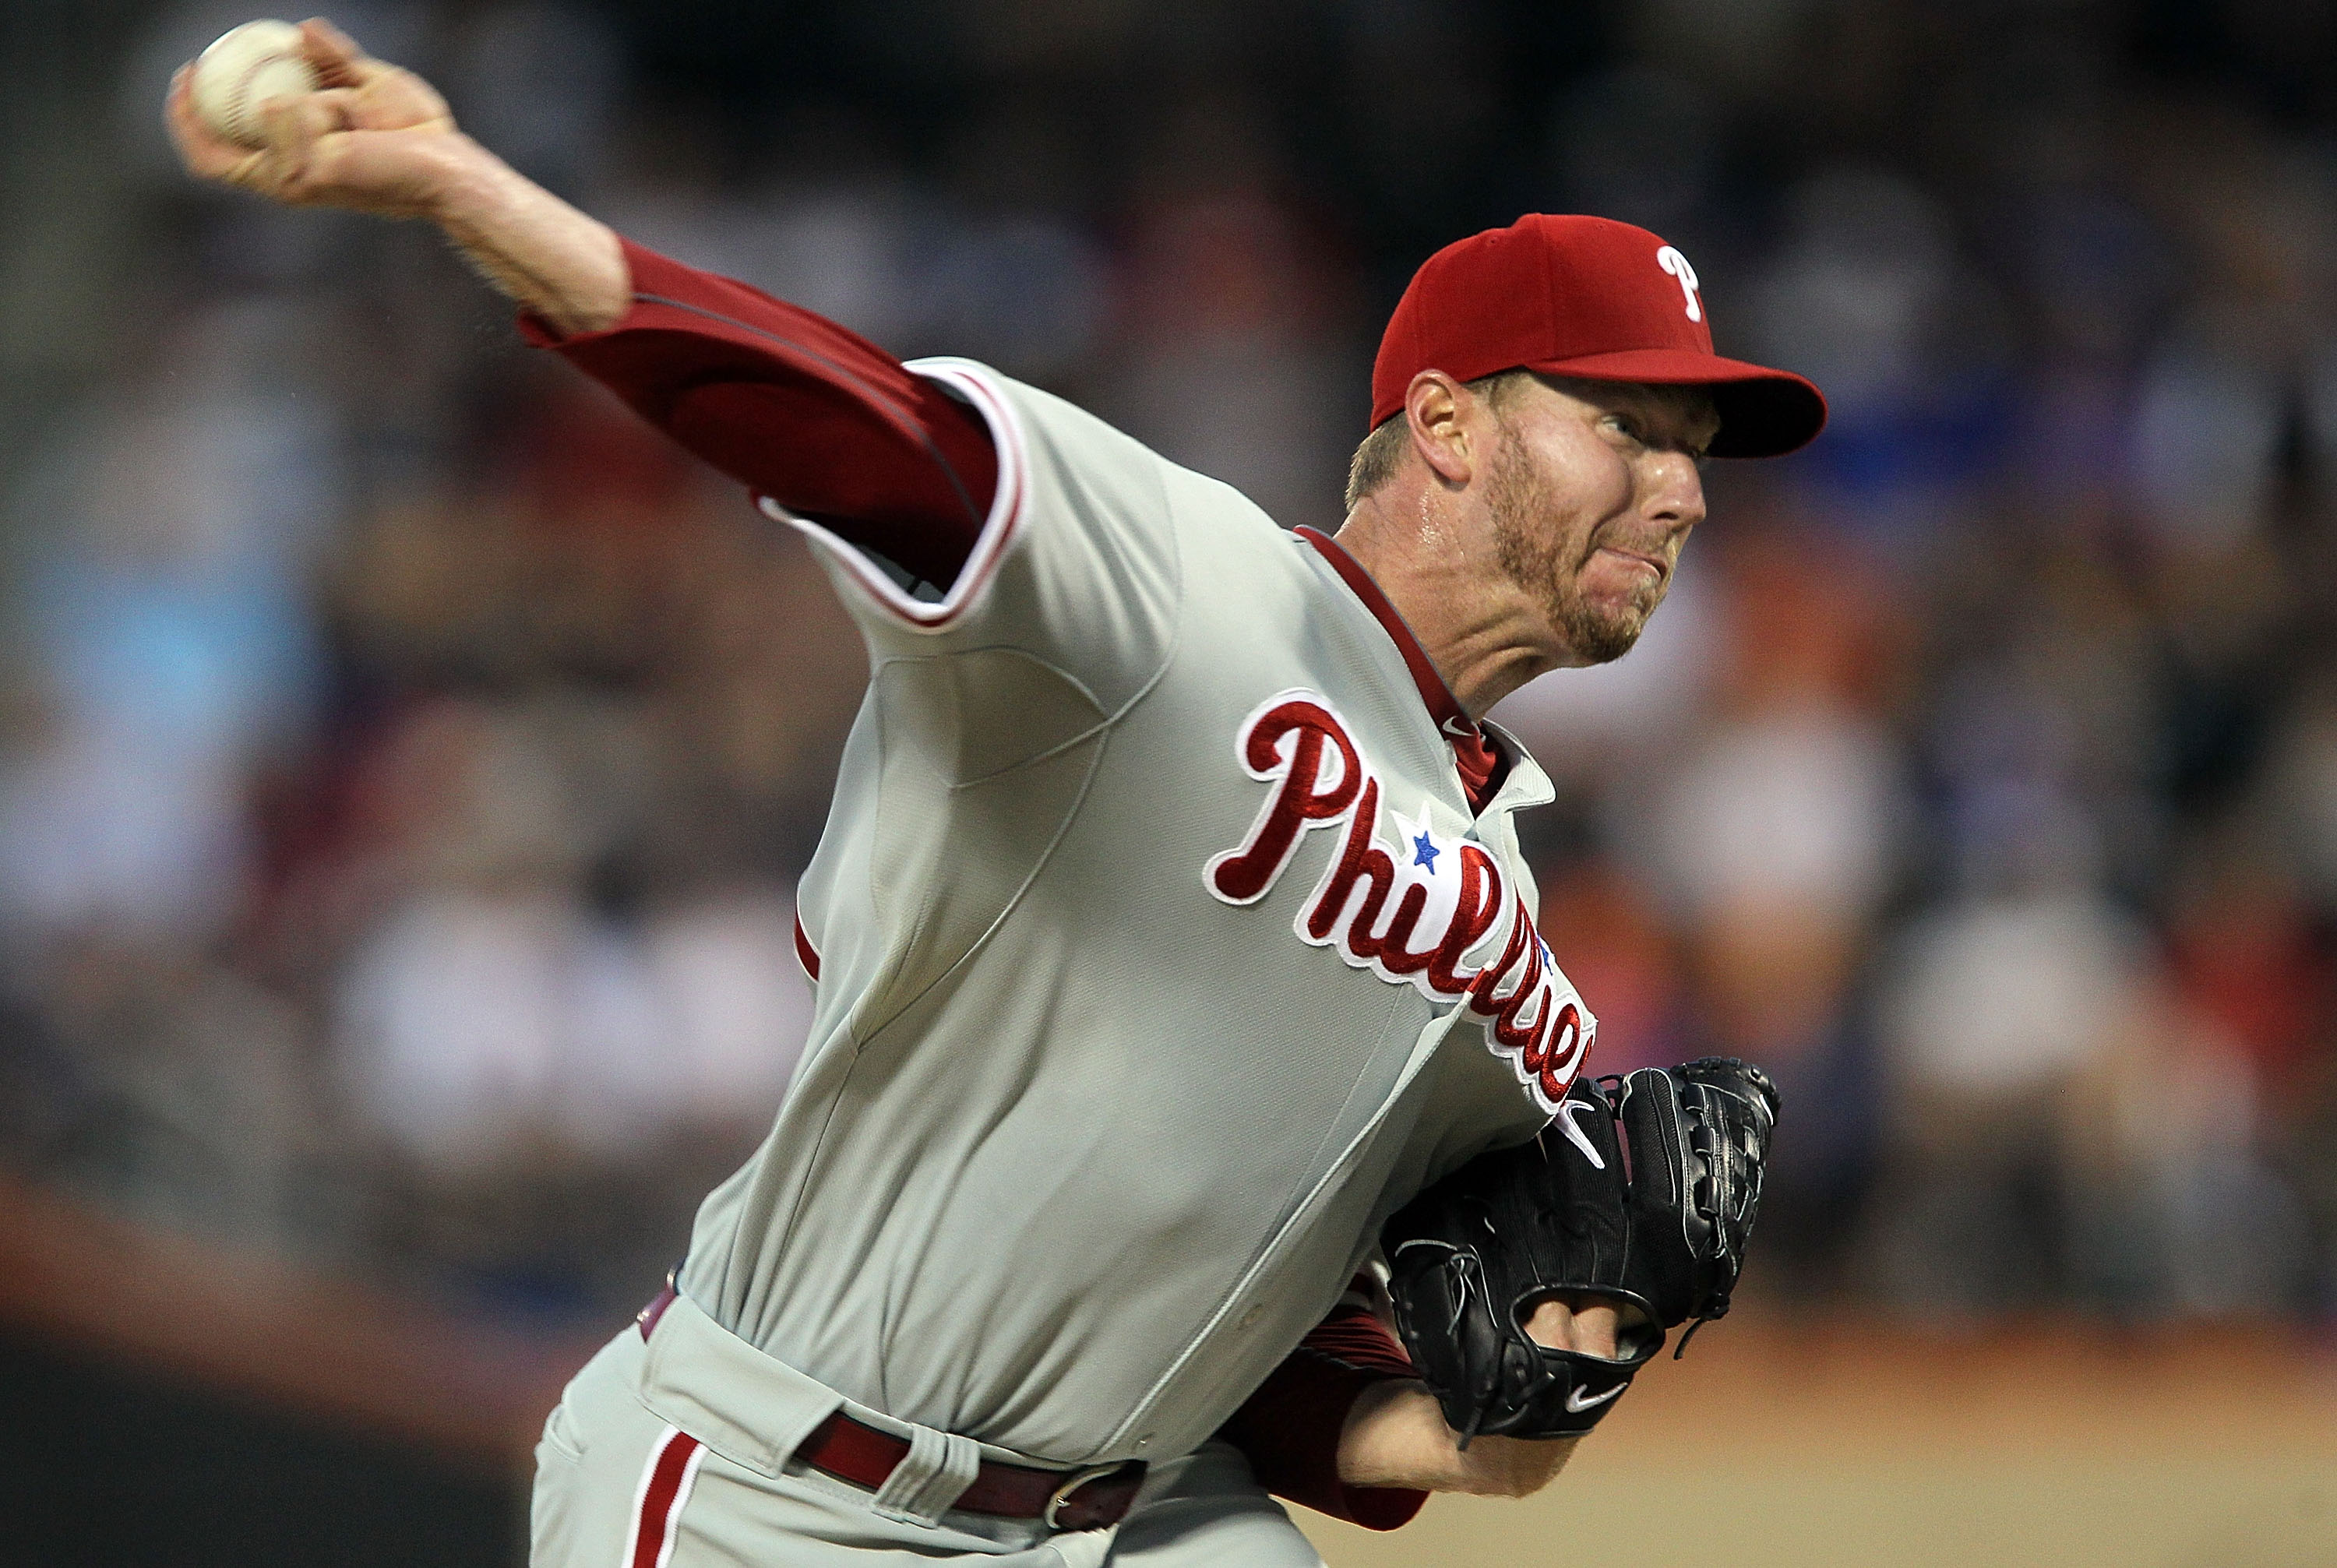 NEW YORK - AUGUST 14:  Roy Halladay #34 of the Philadelphia Phillies delivers a pitch against the New York Mets on August 14, 2010 at Citi Field in the Flushing neighborhood of the Queens borough of New York City.  (Photo by Jim McIsaac/Getty Images)